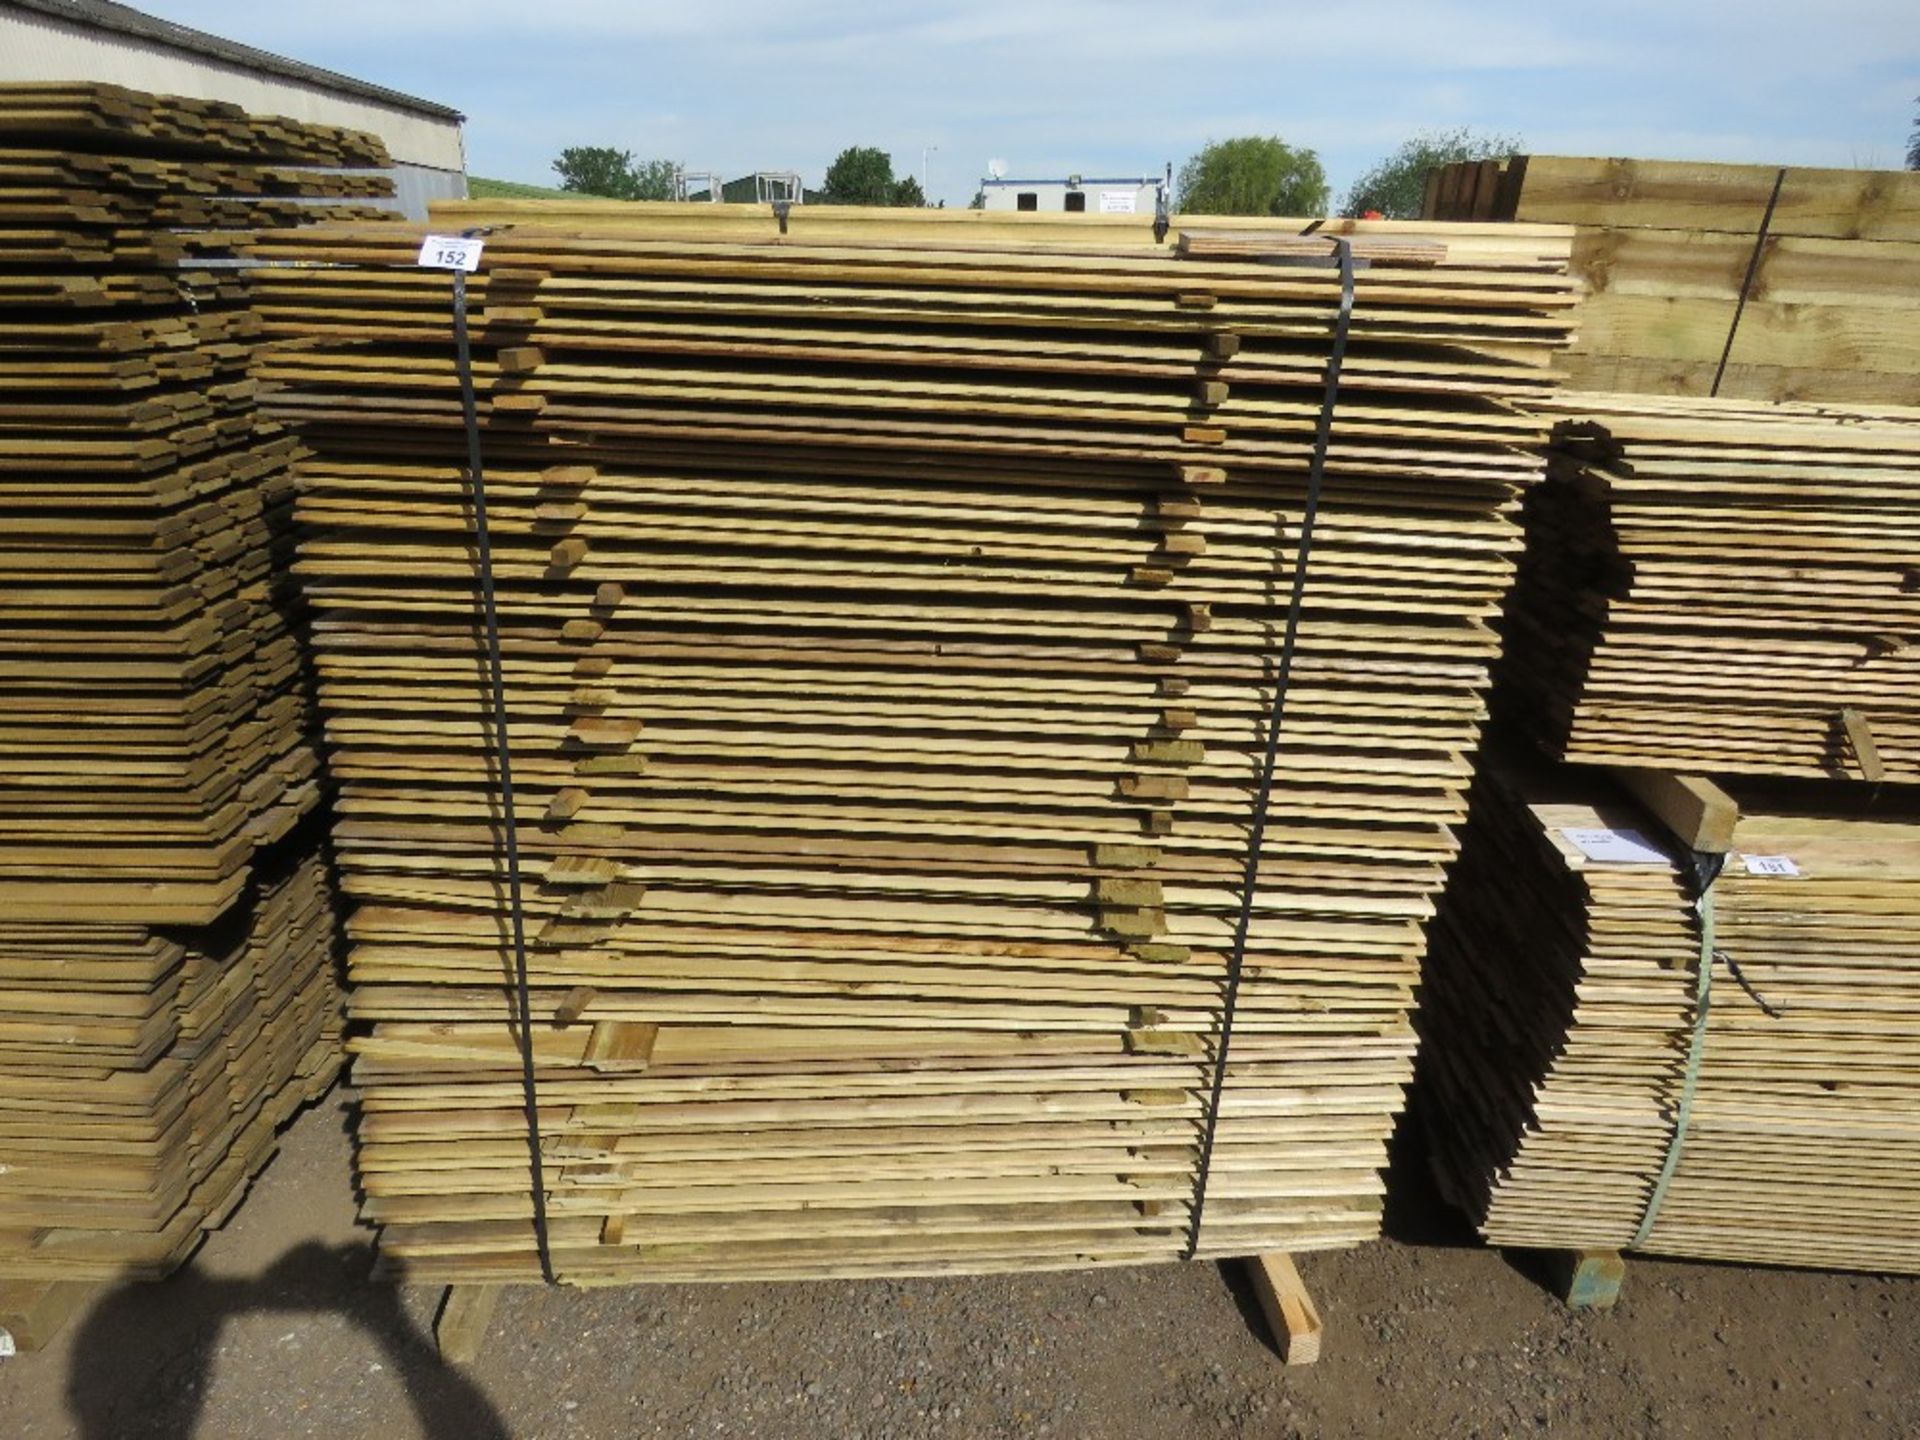 DOUBLE SIZED EXTRA LARGE PACK OF TREATED OVERLAP SHIPLAP TIMBER CLADDING BOARDS 19MM X 100MM @ 1420M